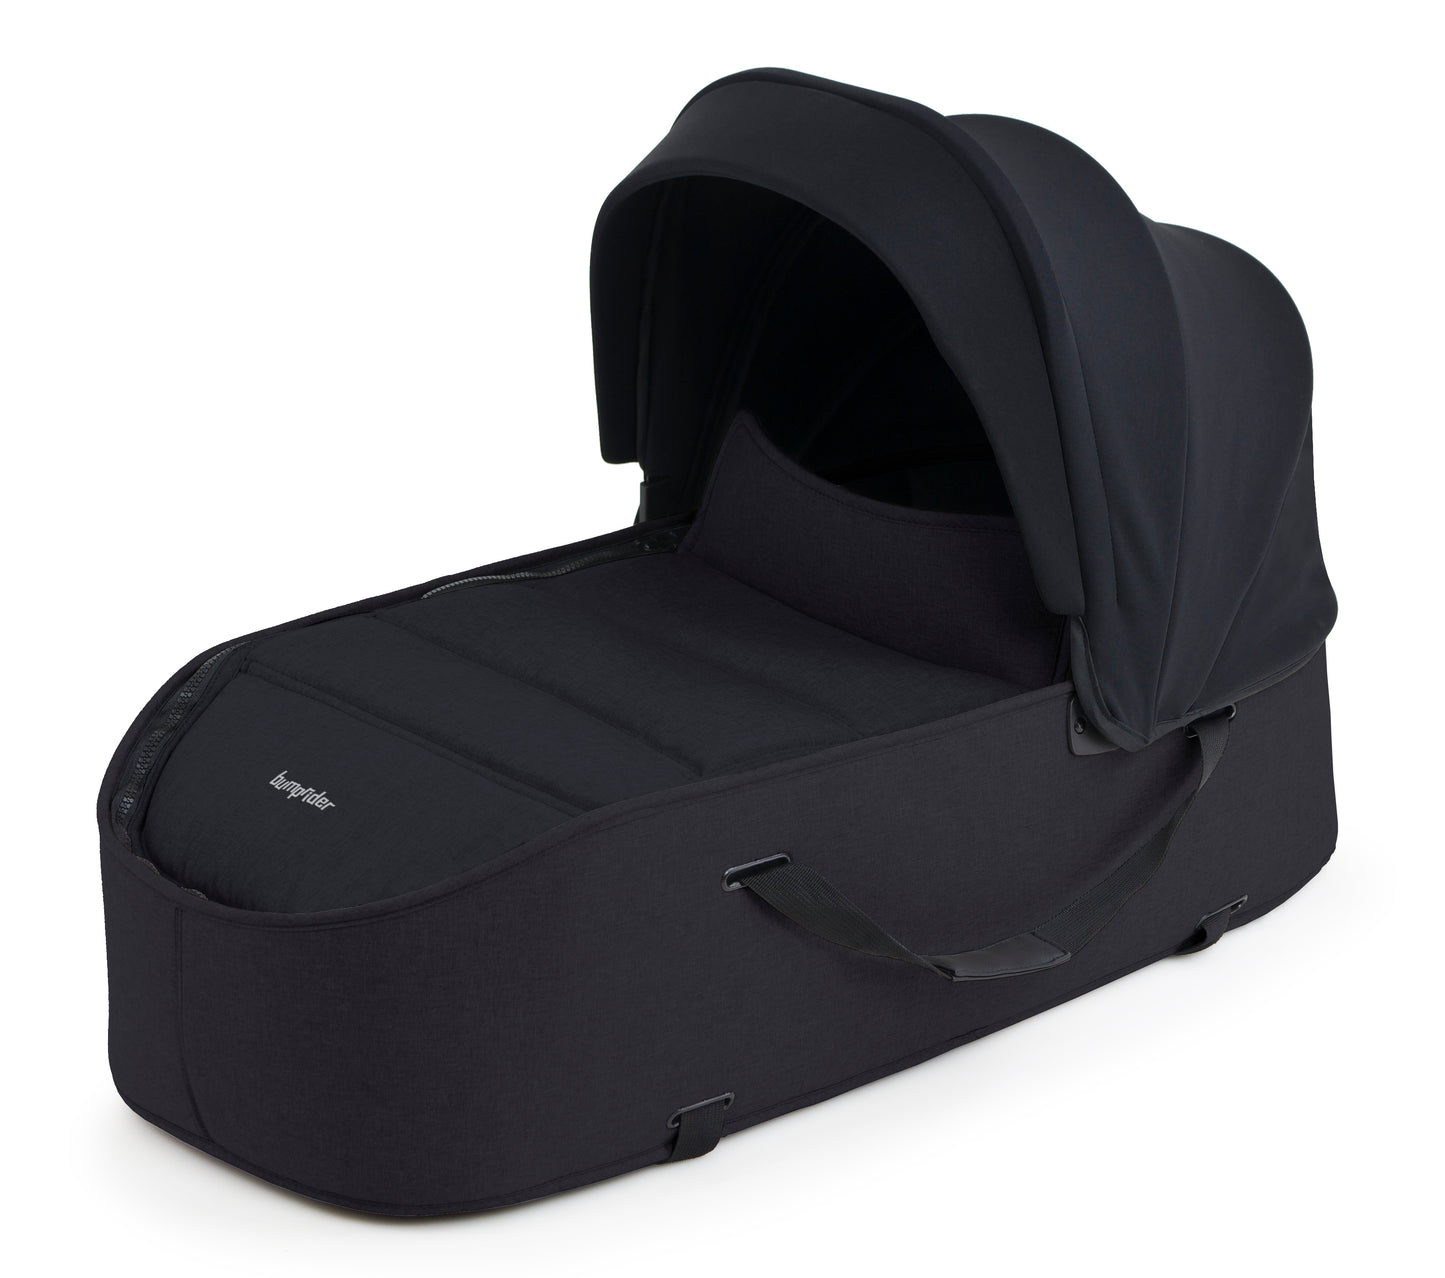 CONNECT 2 CARRYCOT